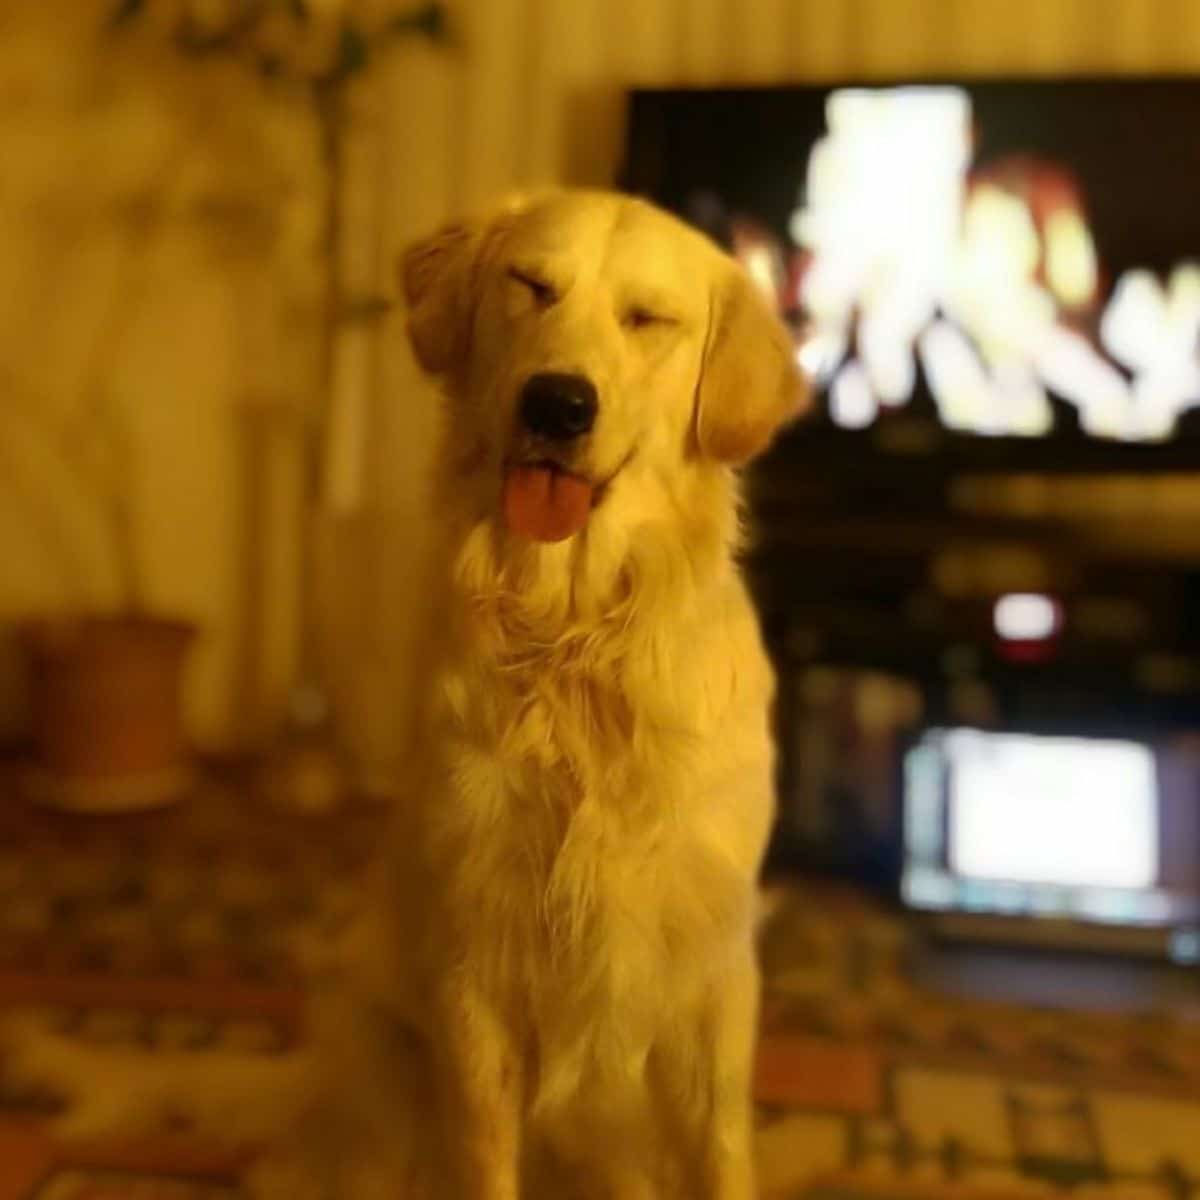 smiling golden retriever with the eyes closed and the tongue sticking out